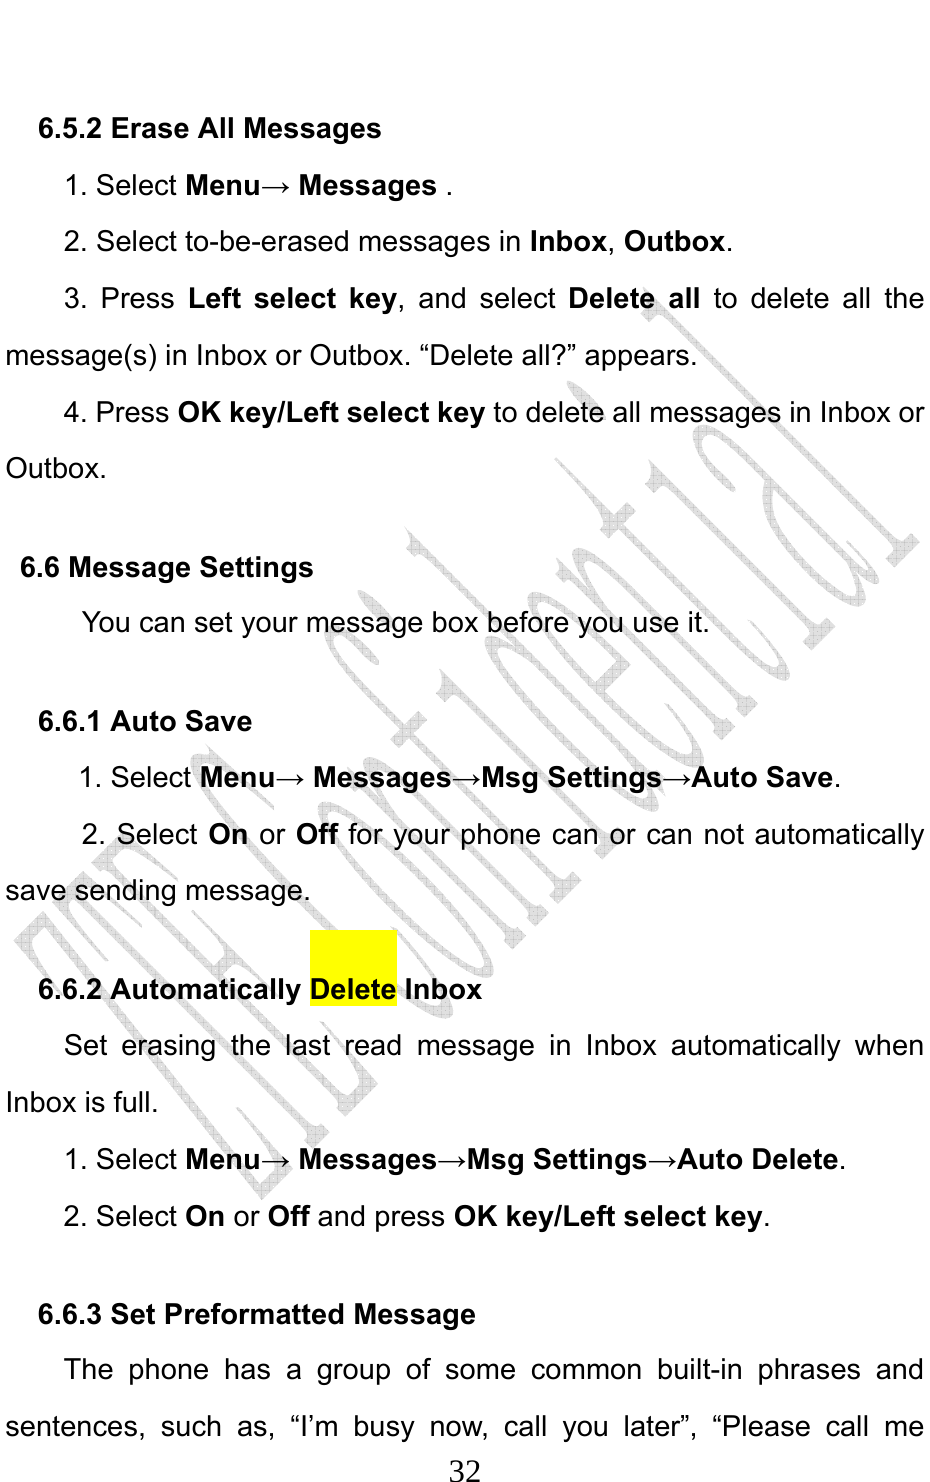                              326.5.2 Erase All Messages 1. Select Menu→ Messages . 2. Select to-be-erased messages in Inbox, Outbox. 3. Press Left select key, and select Delete all to delete all the message(s) in Inbox or Outbox. “Delete all?” appears. 4. Press OK key/Left select key to delete all messages in Inbox or Outbox. 6.6 Message Settings You can set your message box before you use it. 6.6.1 Auto Save 1. Select Menu→ Messages→Msg Settings→Auto Save. 2. Select On or Off for your phone can or can not automatically save sending message. 6.6.2 Automatically Delete Inbox Set erasing the last read message in Inbox automatically when Inbox is full. 1. Select Menu→ Messages→Msg Settings→Auto Delete. 2. Select On or Off and press OK key/Left select key. 6.6.3 Set Preformatted Message   The phone has a group of some common built-in phrases and sentences, such as, “I’m busy now, call you later”, “Please call me 